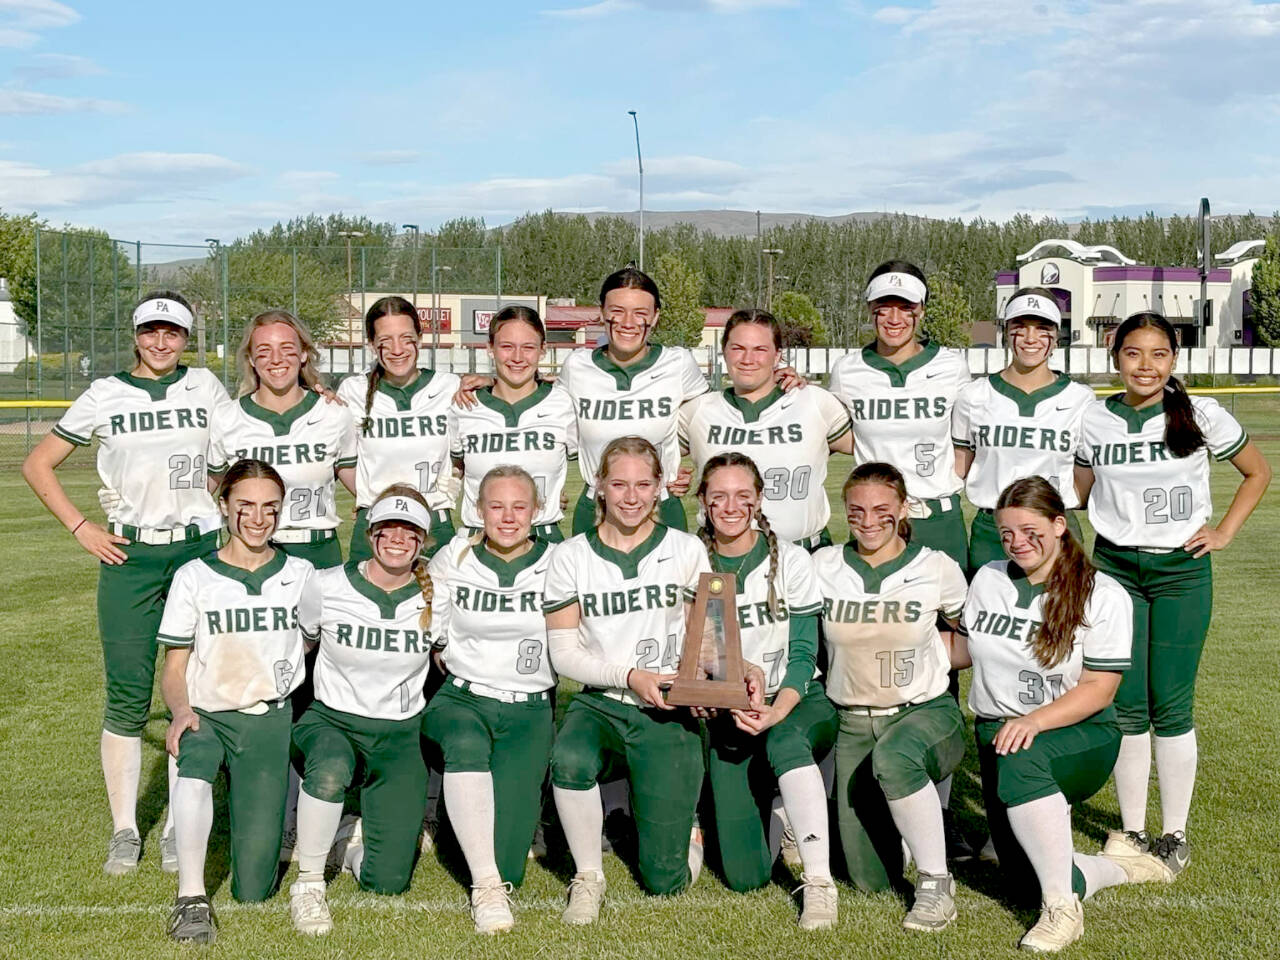 The Port Angeles softball team celebrates its fourth-place finish at 2A state tournament Saturday. The Roughriders won three out of five games at state to place and they only graduate two seniors. (Port Angeles softball)